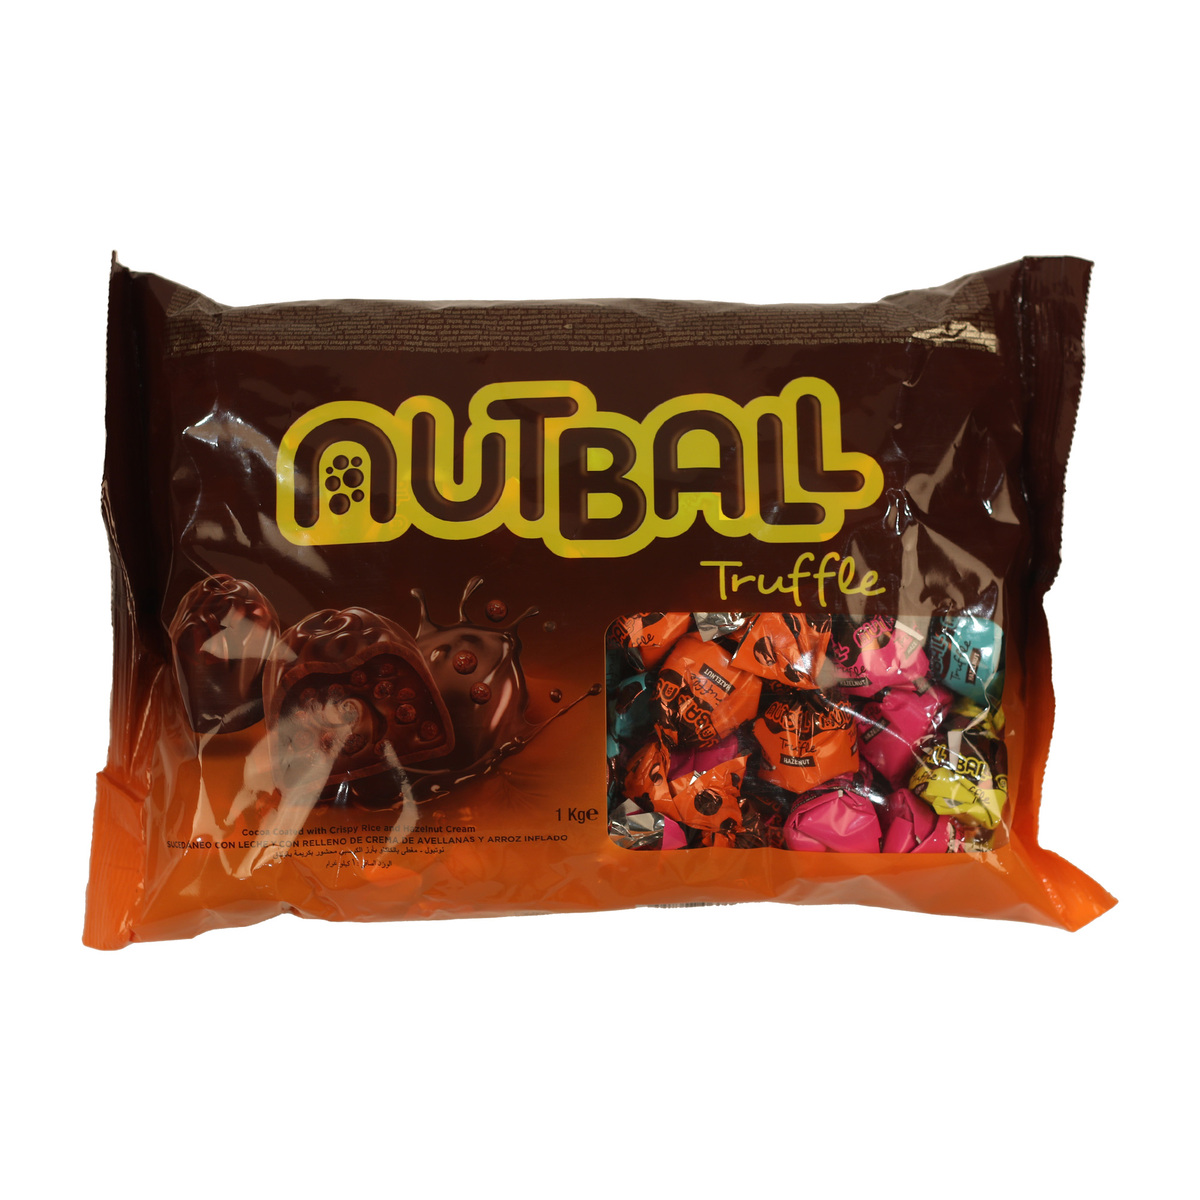 Solen Nutball Choco Truffle Value Pack 1 kg